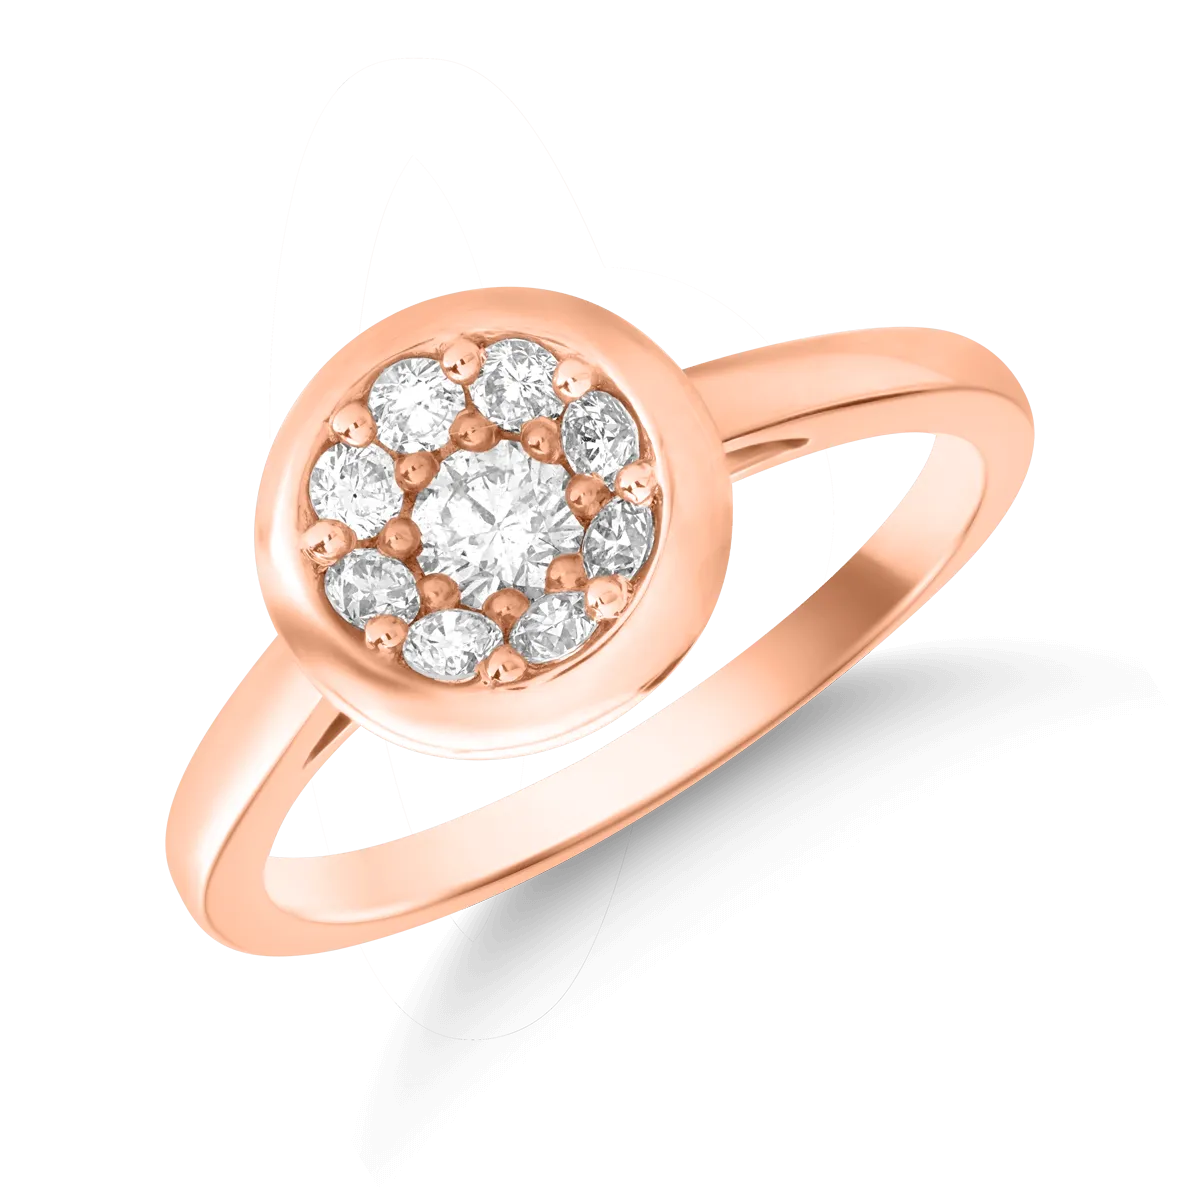 14K rose gold ring with 0.44ct diamonds